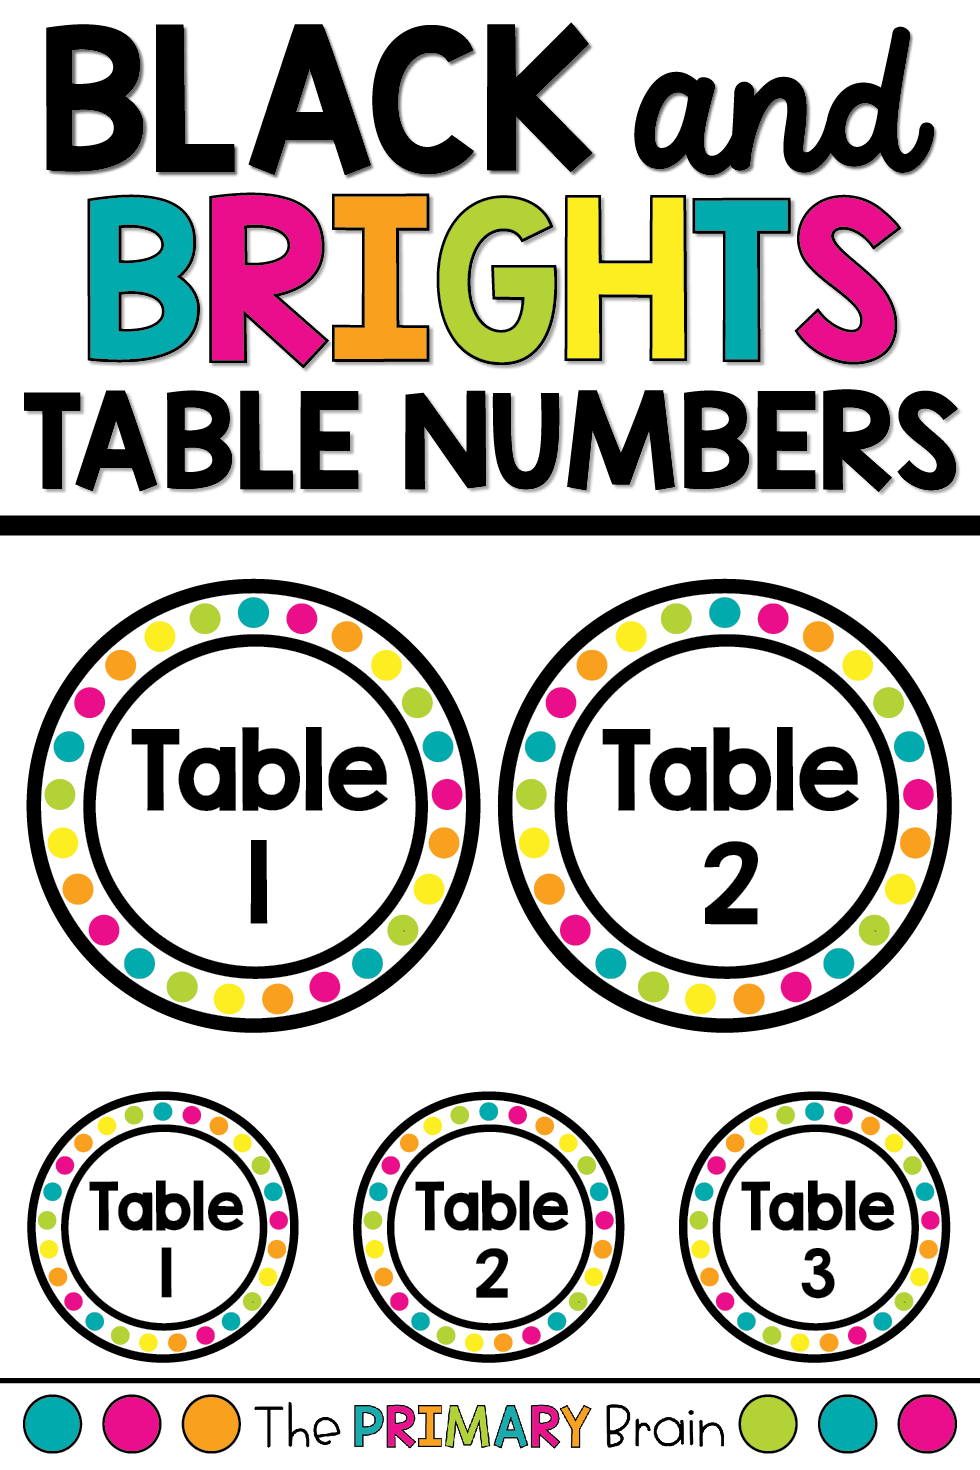 EDITABLE Table Numbers Black And Brights Classroom Decor 